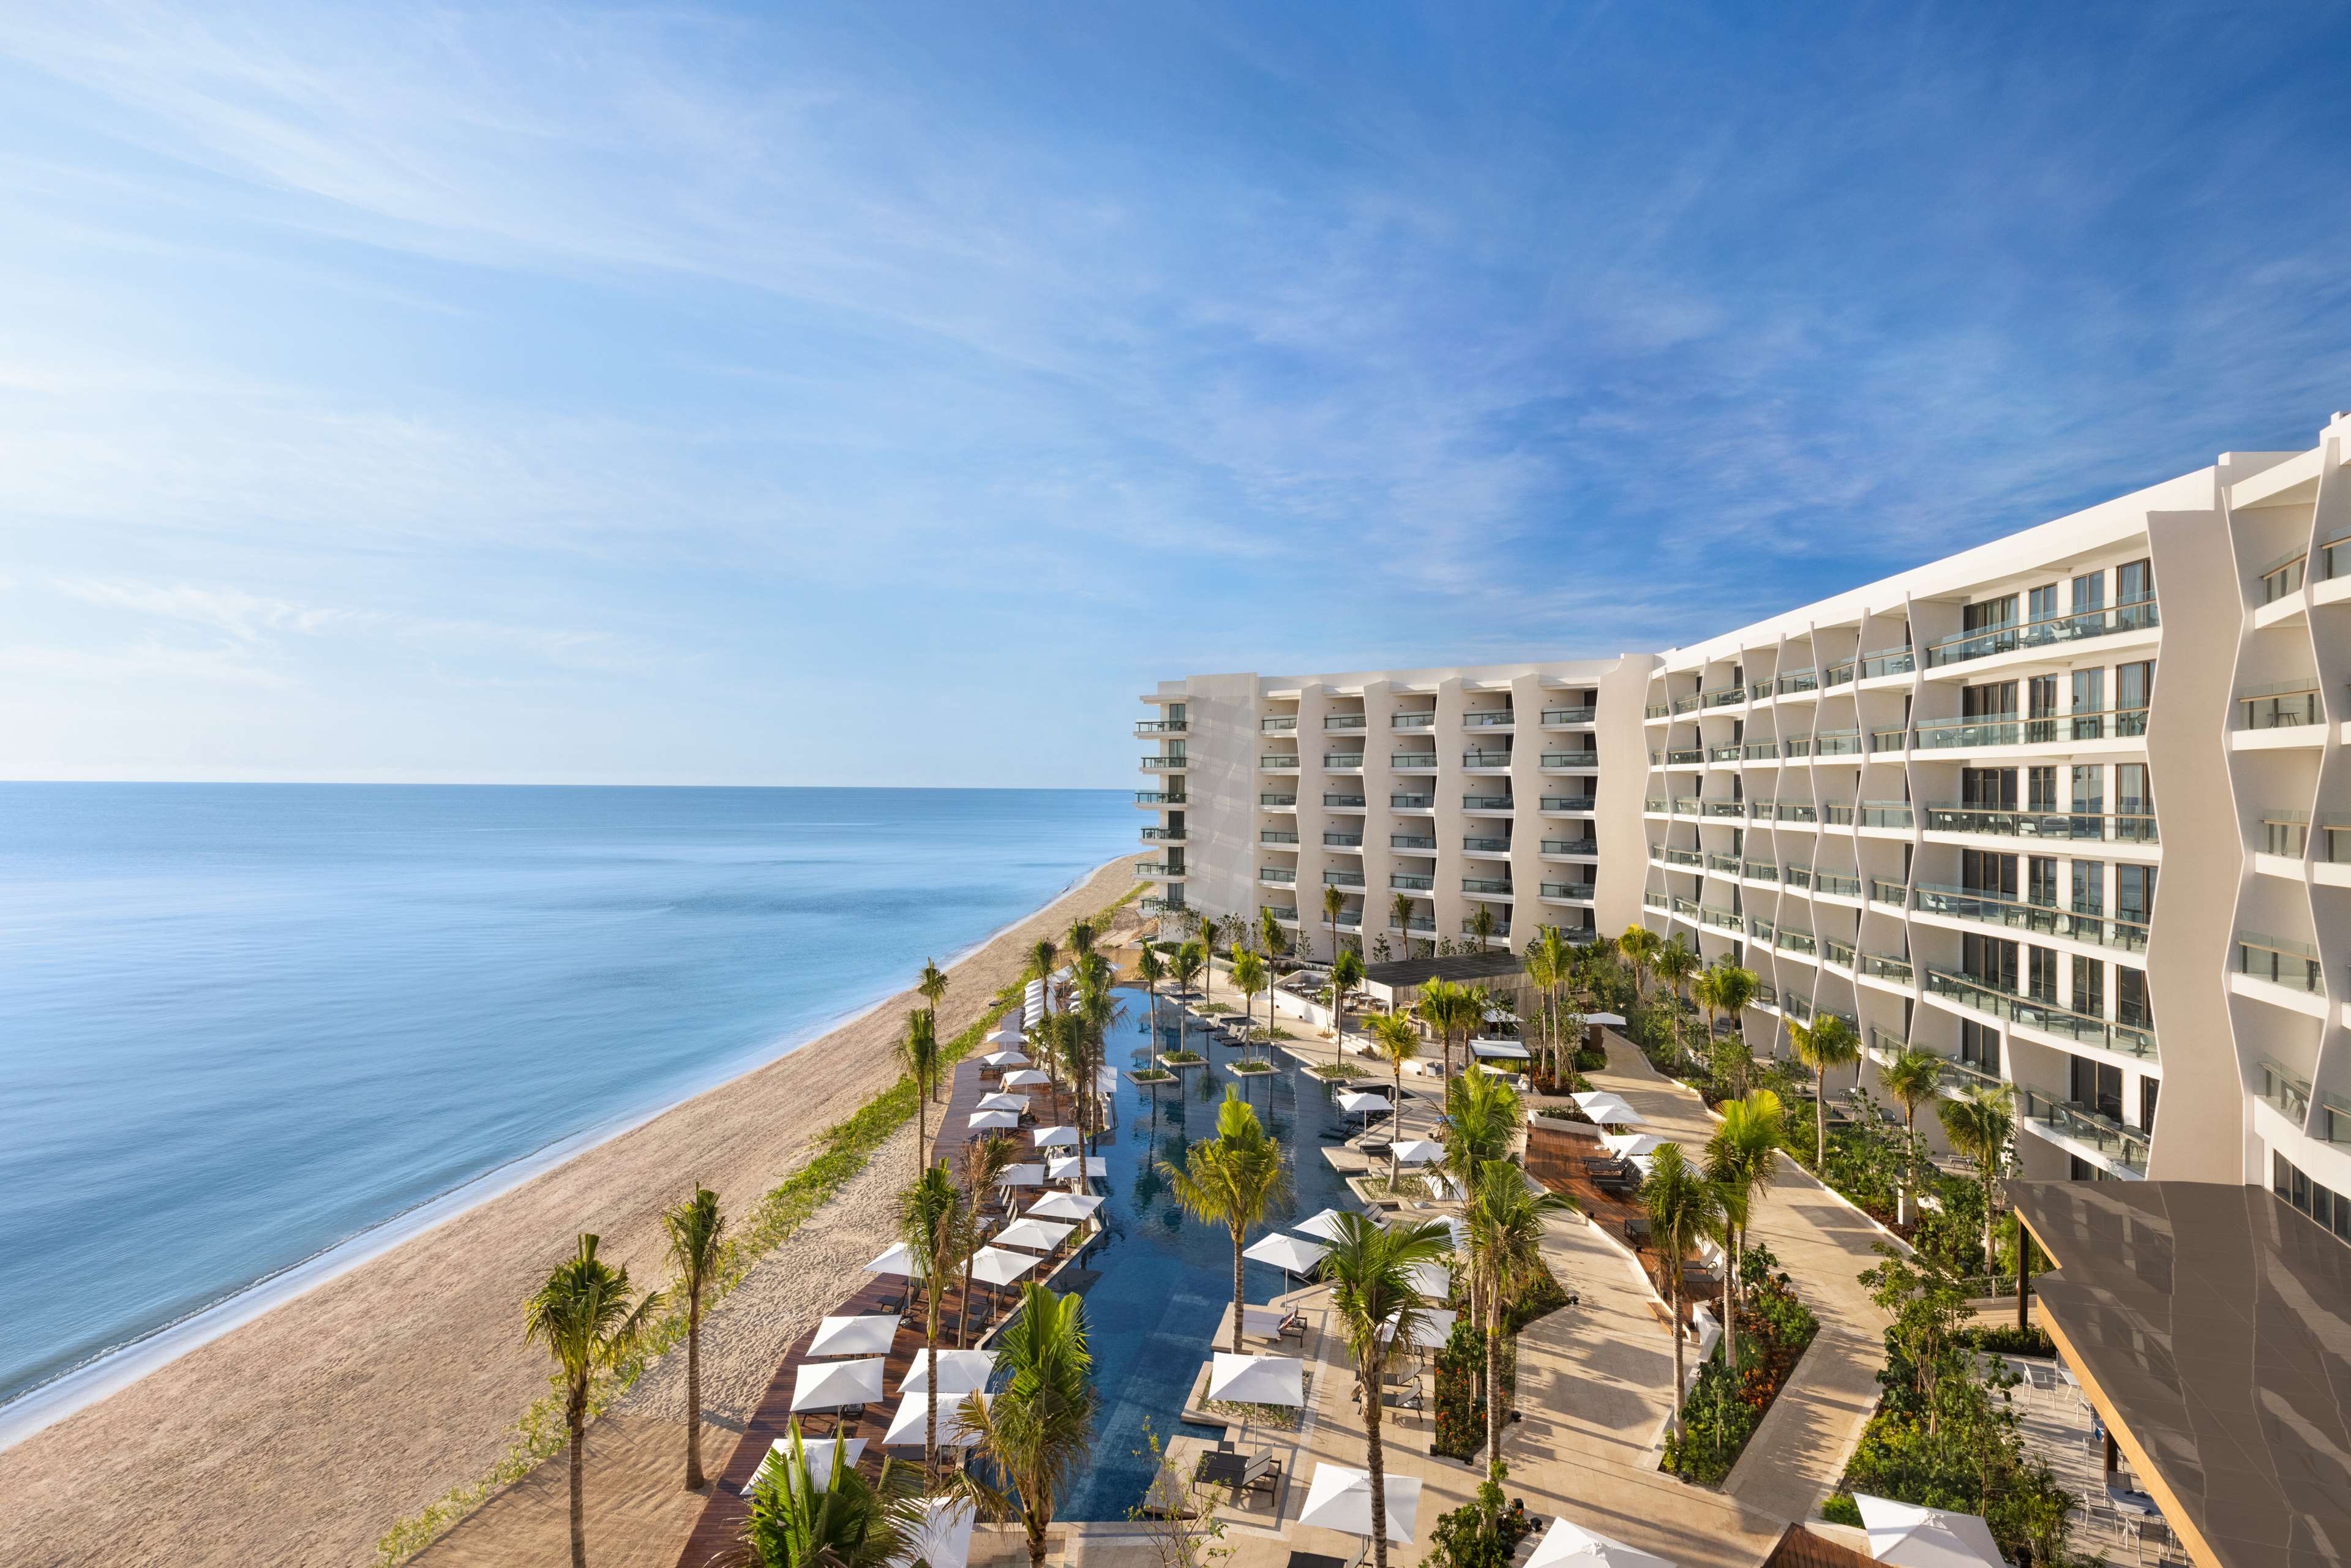 Images Hilton Cancun, an All-Inclusive Resort